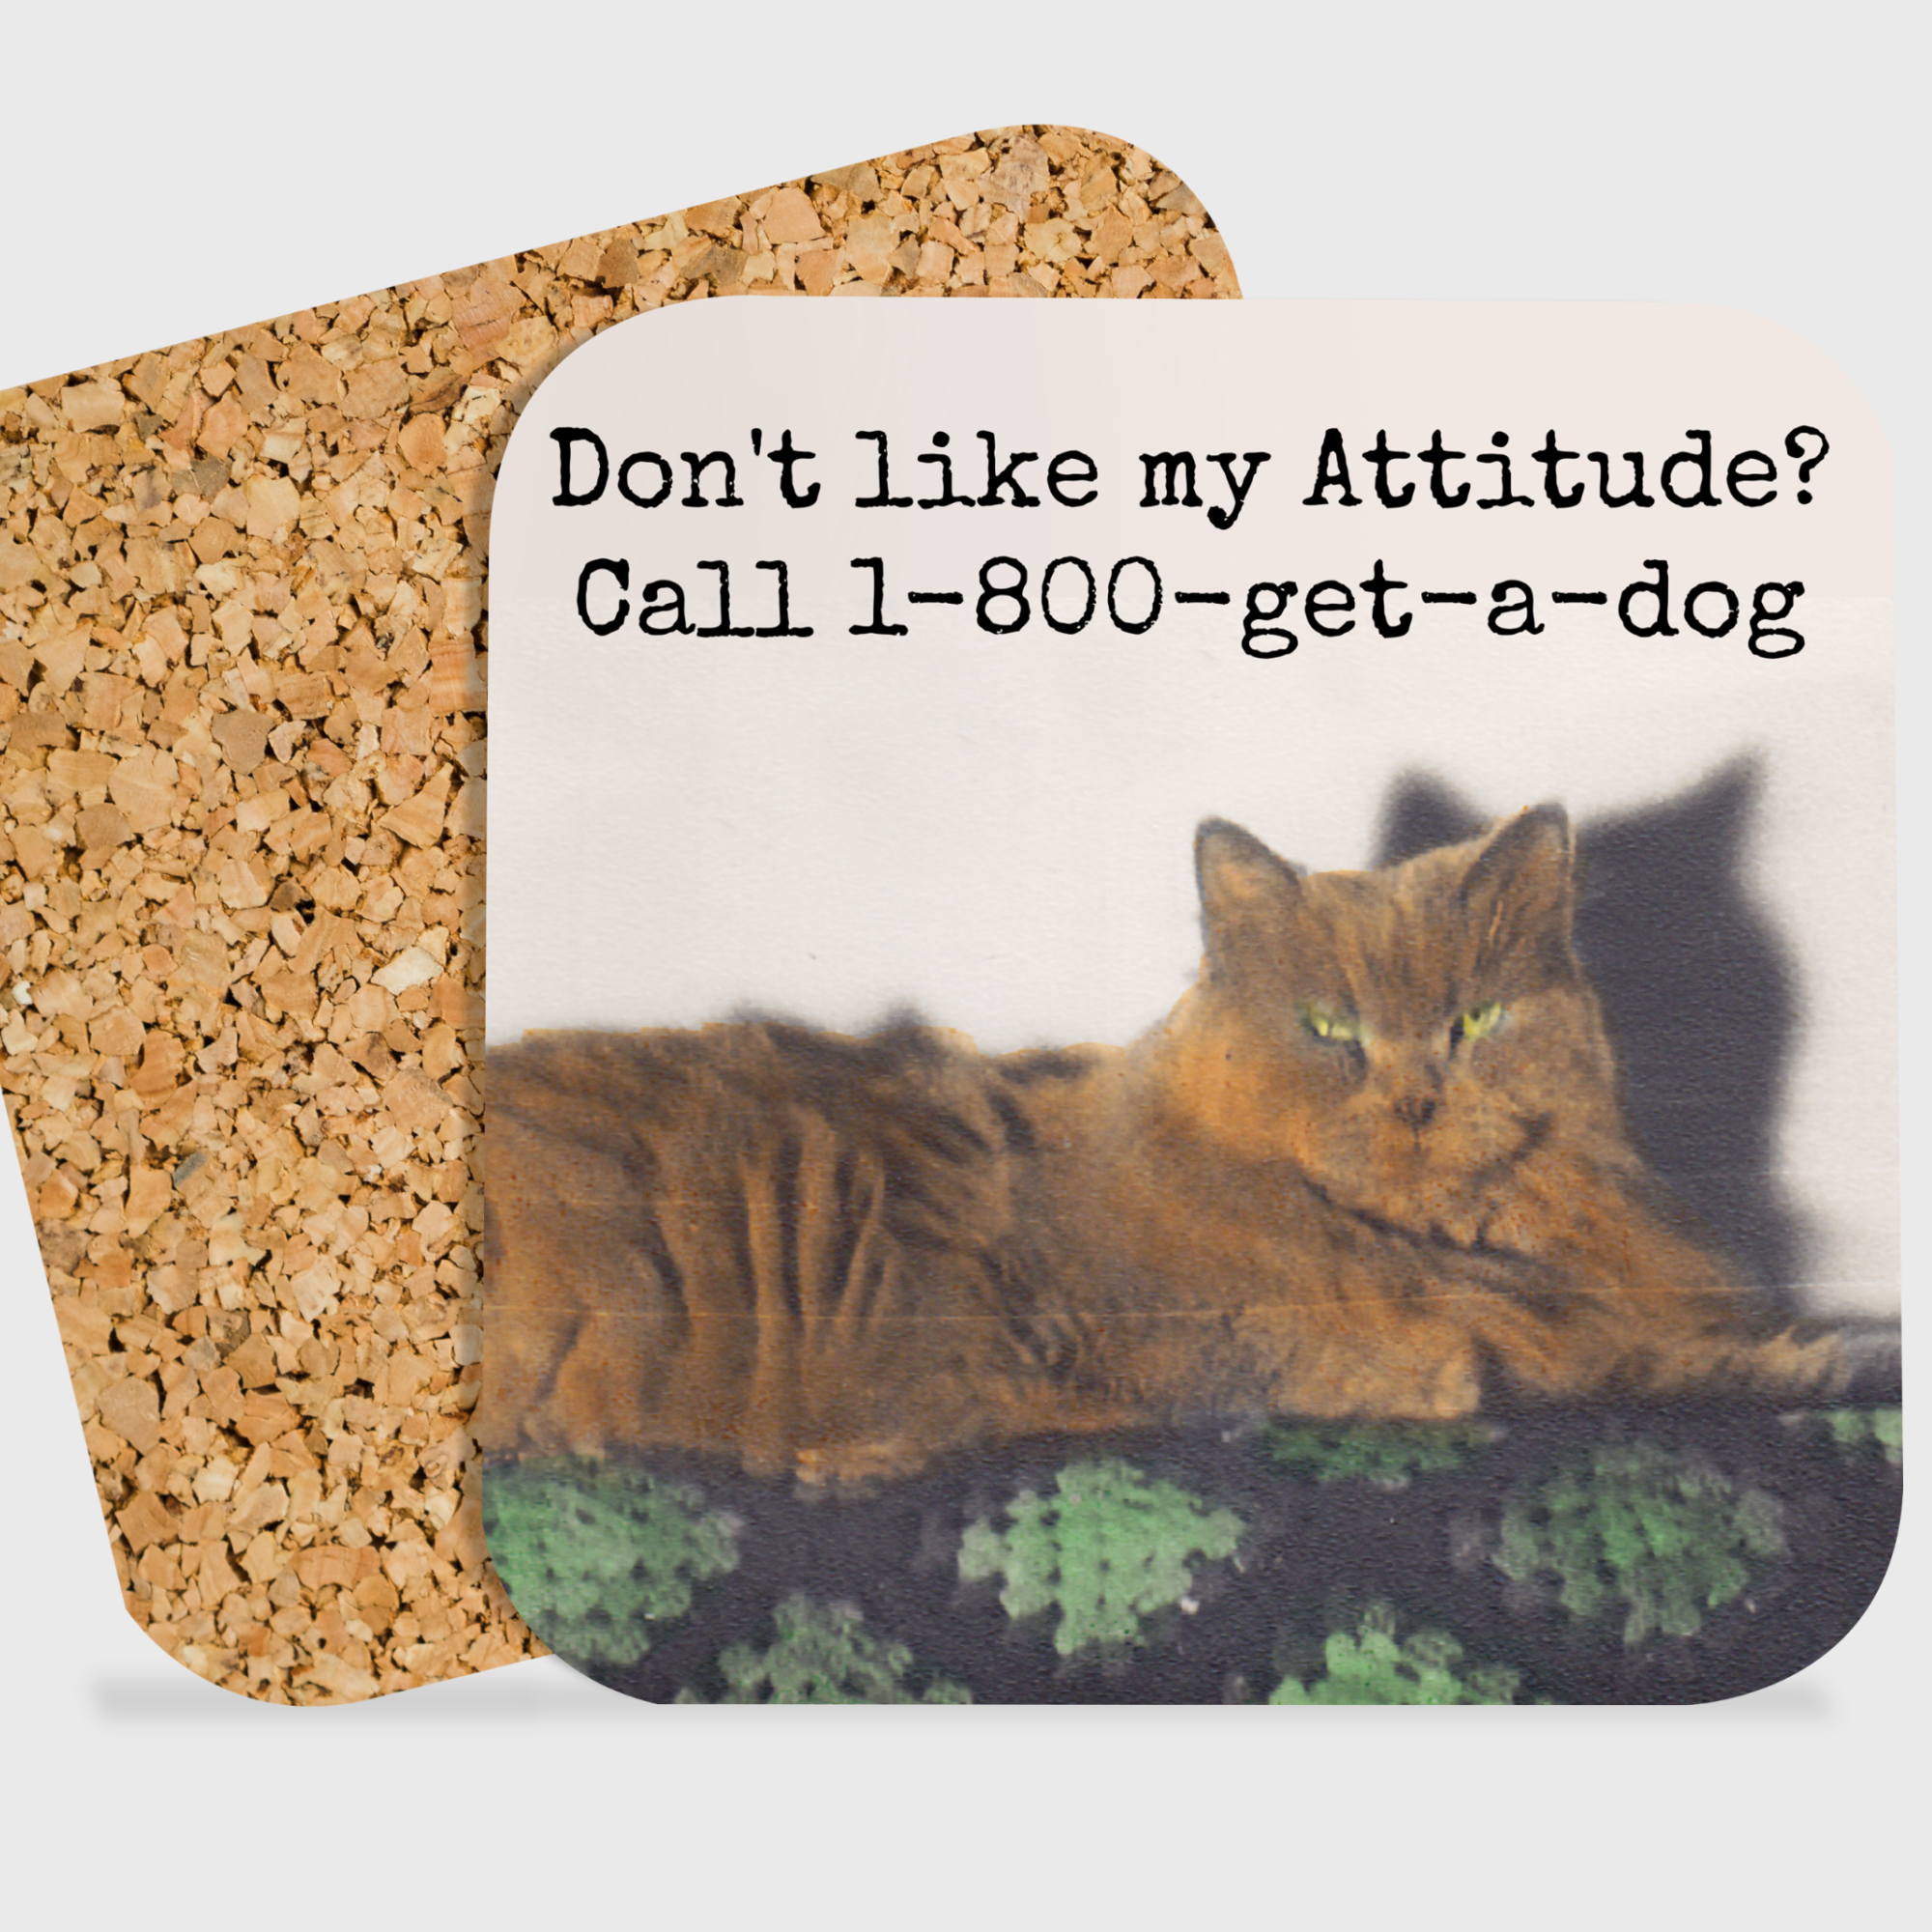 COASTER. Call 1-800-get-a-dog. Funny Vintage Cat Photo Gift. - 0